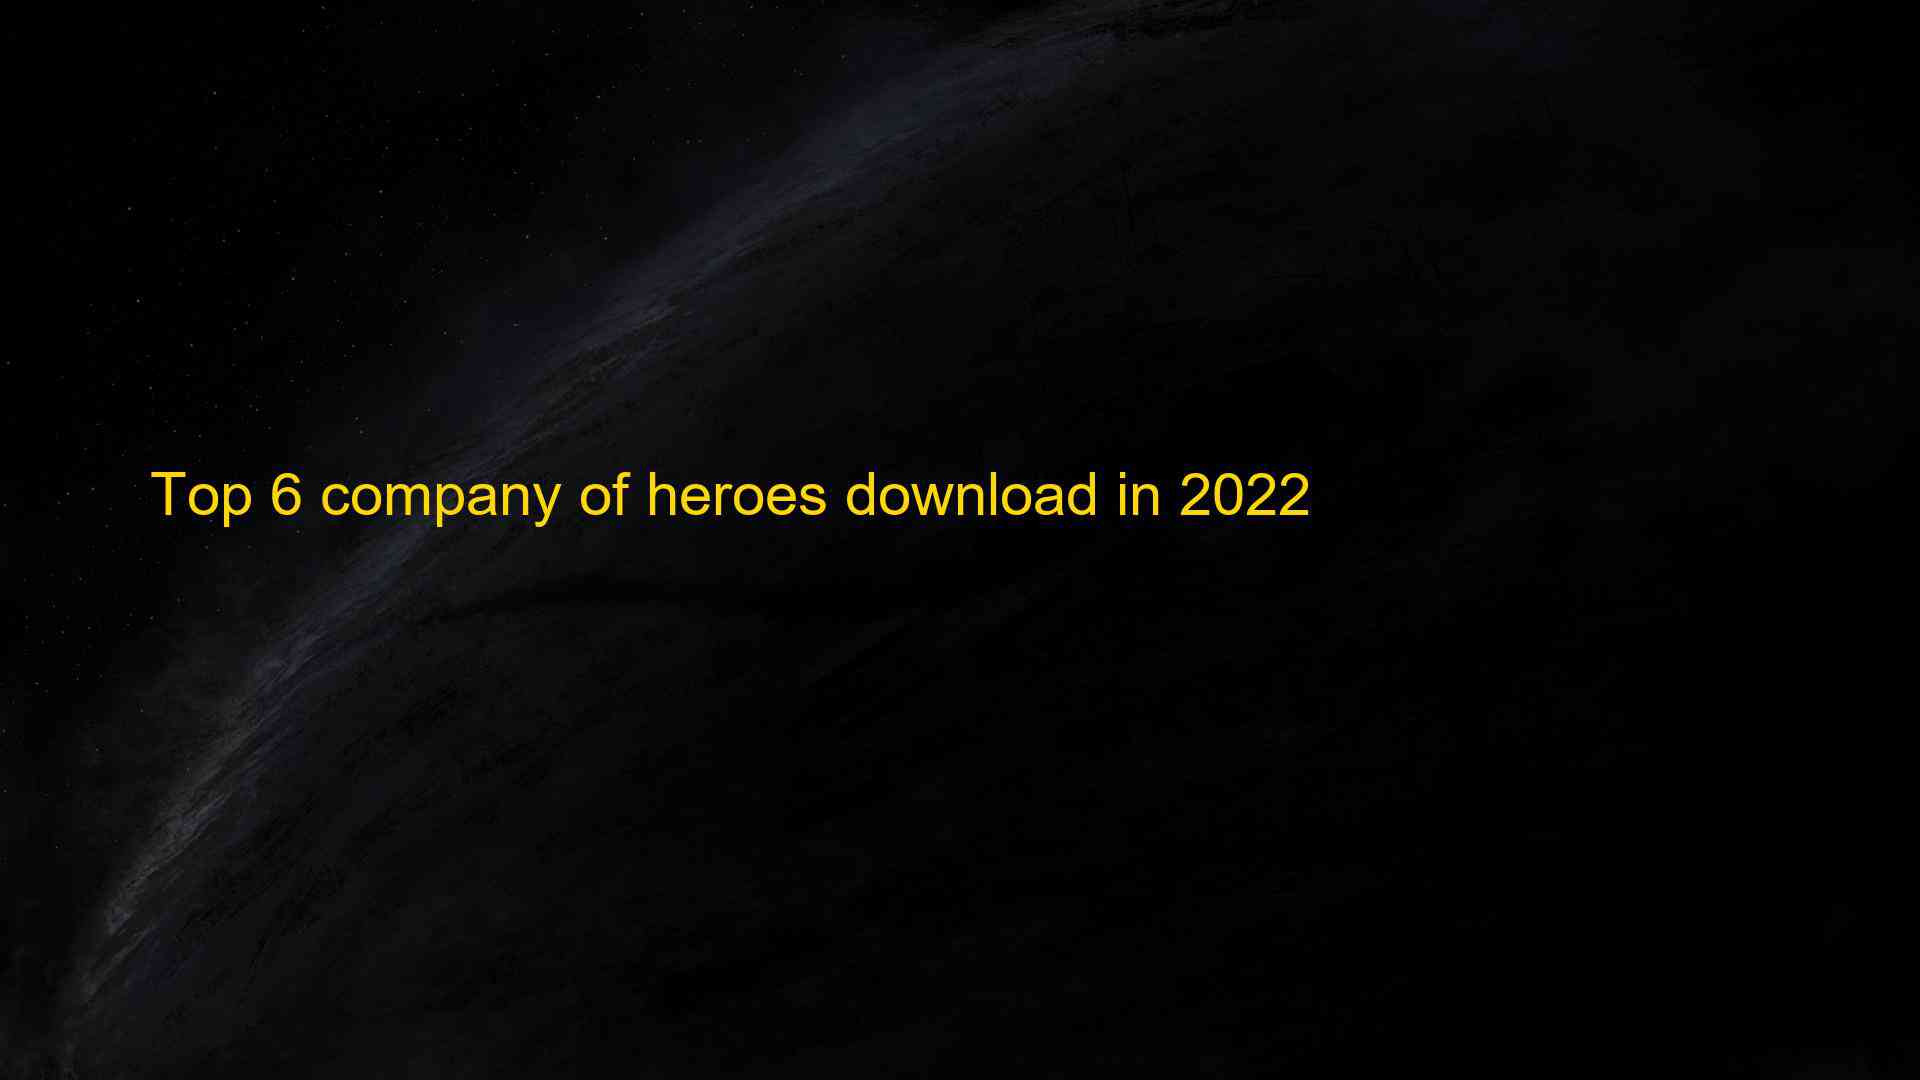 Top 6 company of heroes download in 2022 1660014707